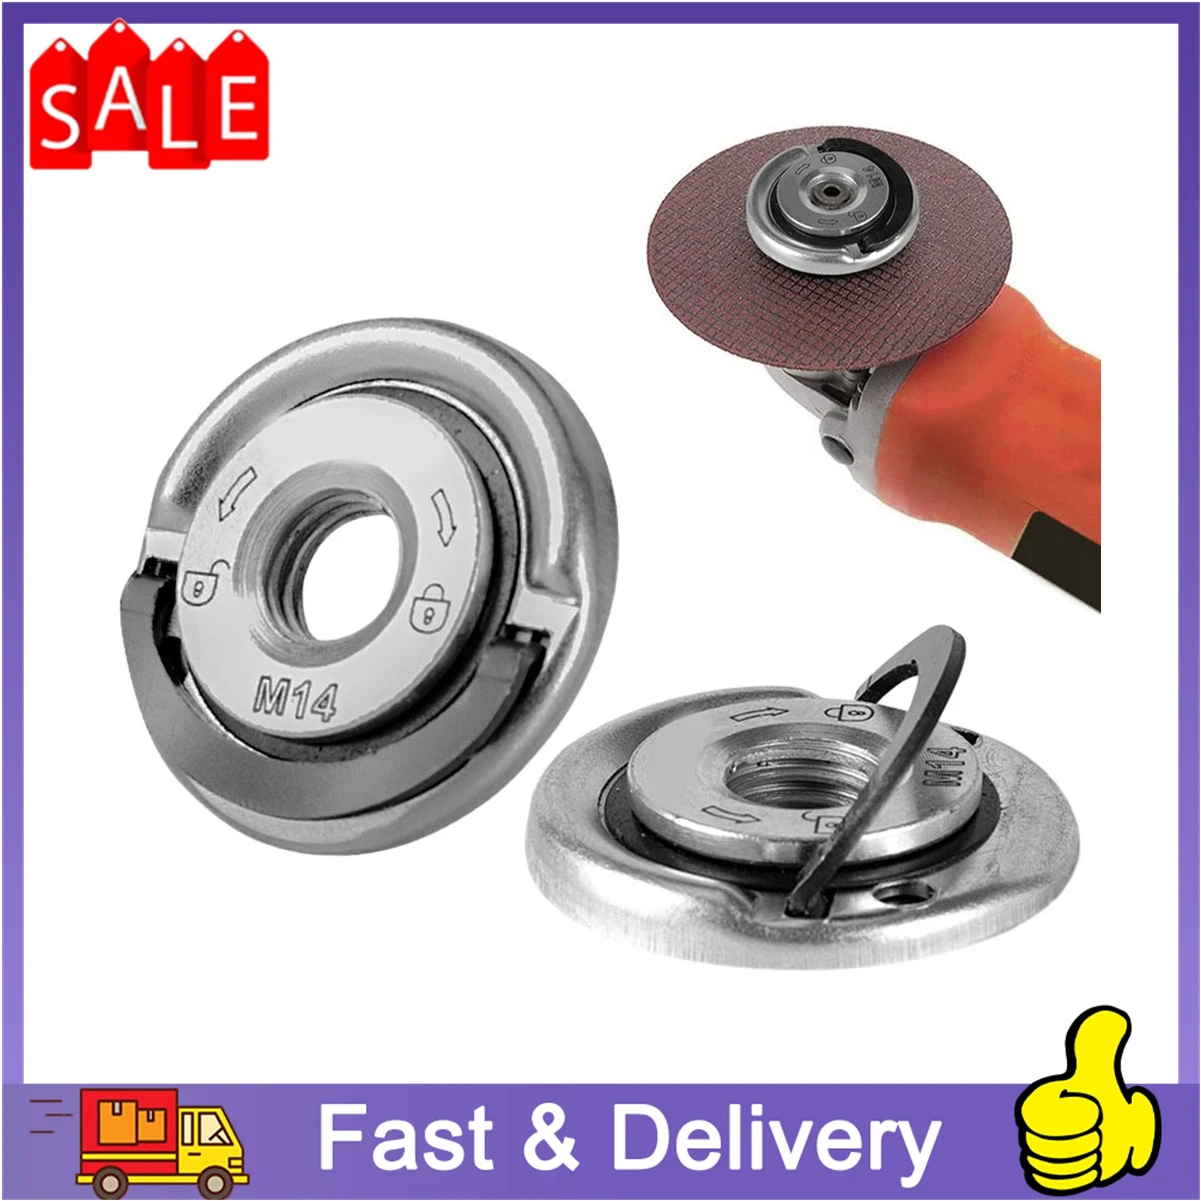 Quick Release Flange Nut M14 Thread Angle Grinder Release Locking Nut Pressing Plate For Angle Grinder Clamping Flange Accessory shdiatool 1pc adapter m14 m10 5 8“ 11 thread to shank quick release angle grinder electric drill converter accessory hand tool